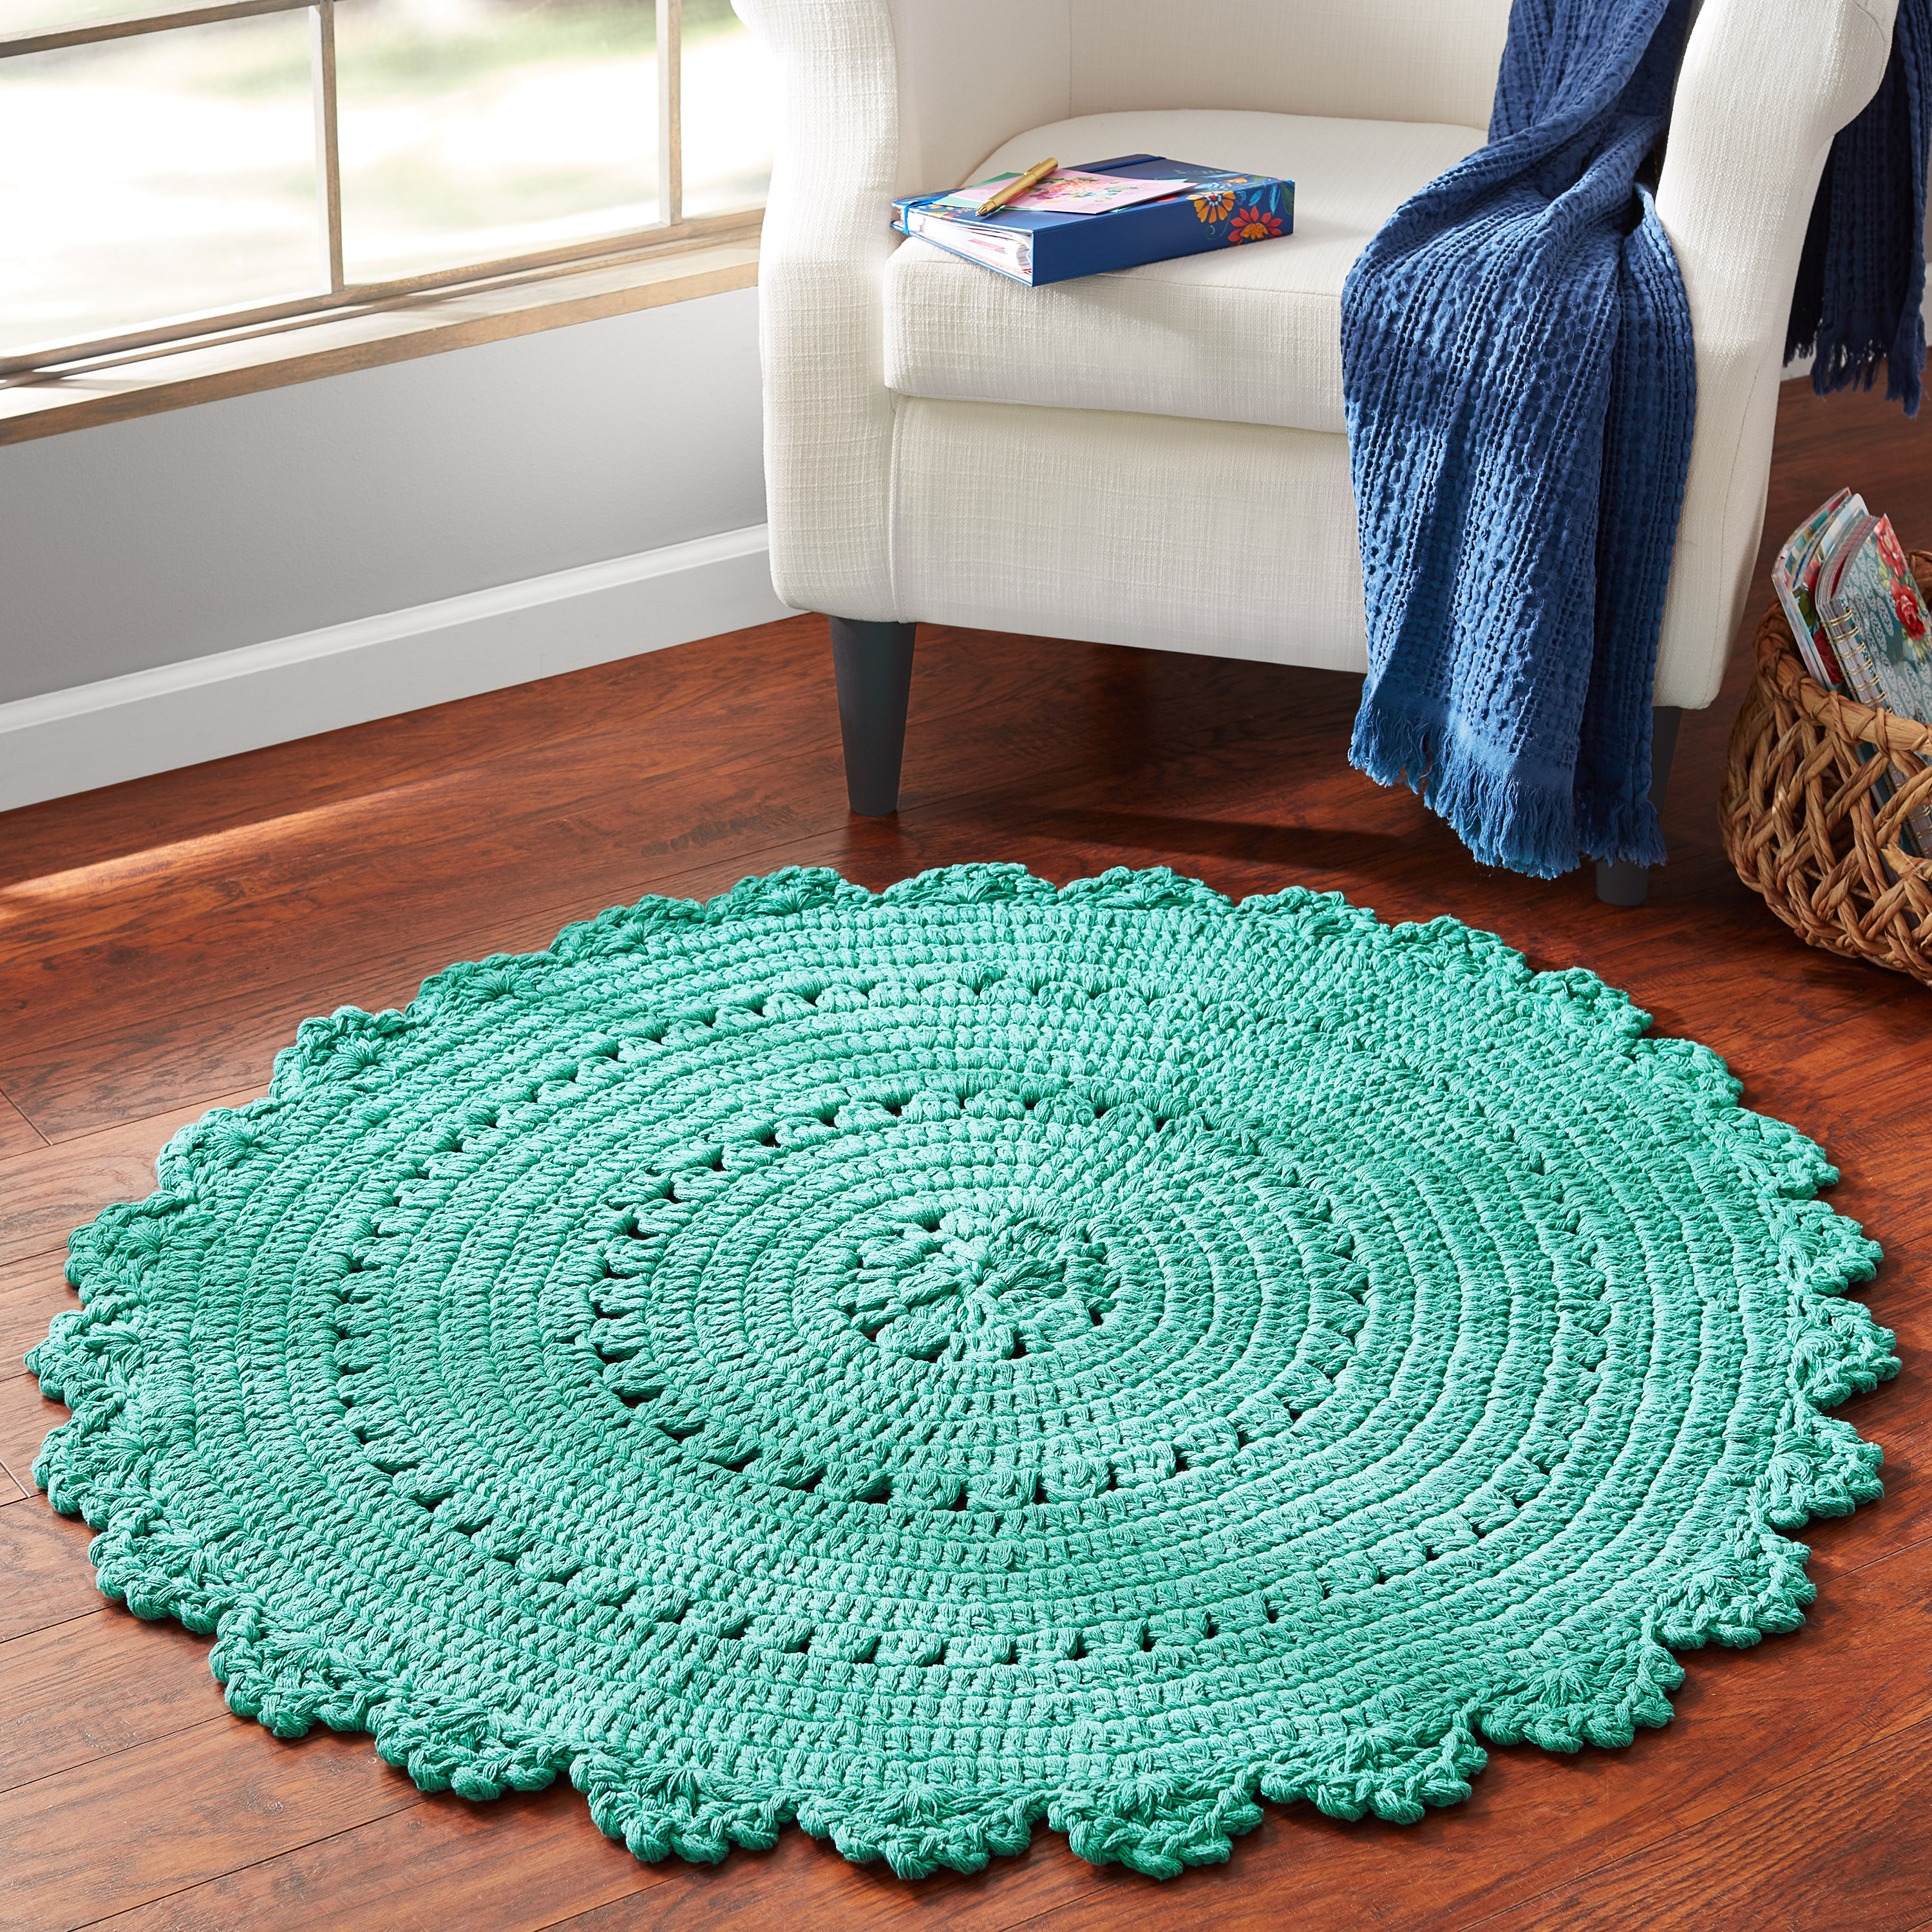 The Pioneer Woman Round Cotton Crochet Accent Rug, Teal - image 3 of 5